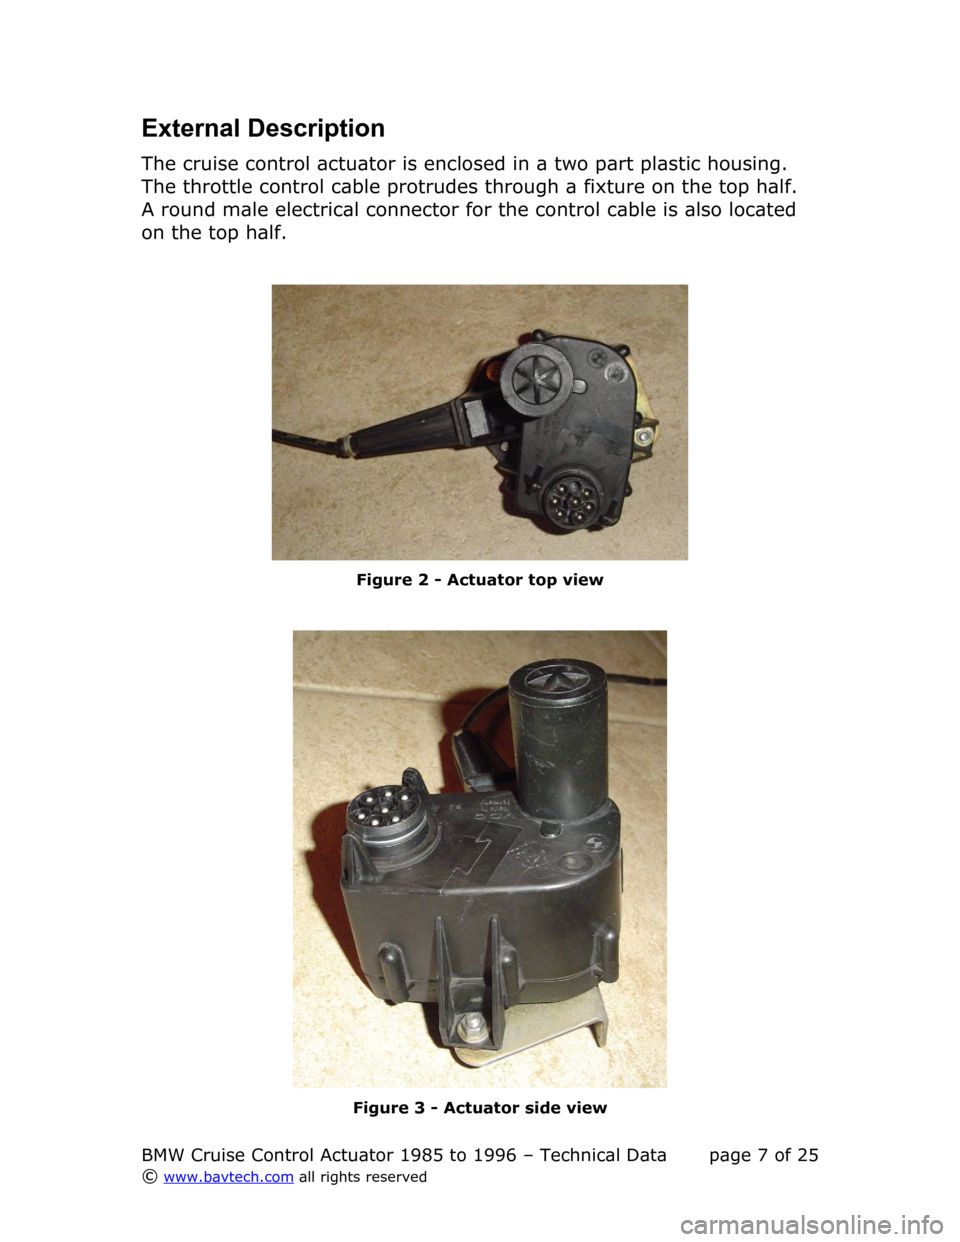 BMW 7 SERIES 1989 E32 Cruise Control Acutator External Description
The cruise control actuator is enclosed in a two part plastic housing.  
The throttle control cable protrudes through a fixture on the top half.  
A round male electrical connecto